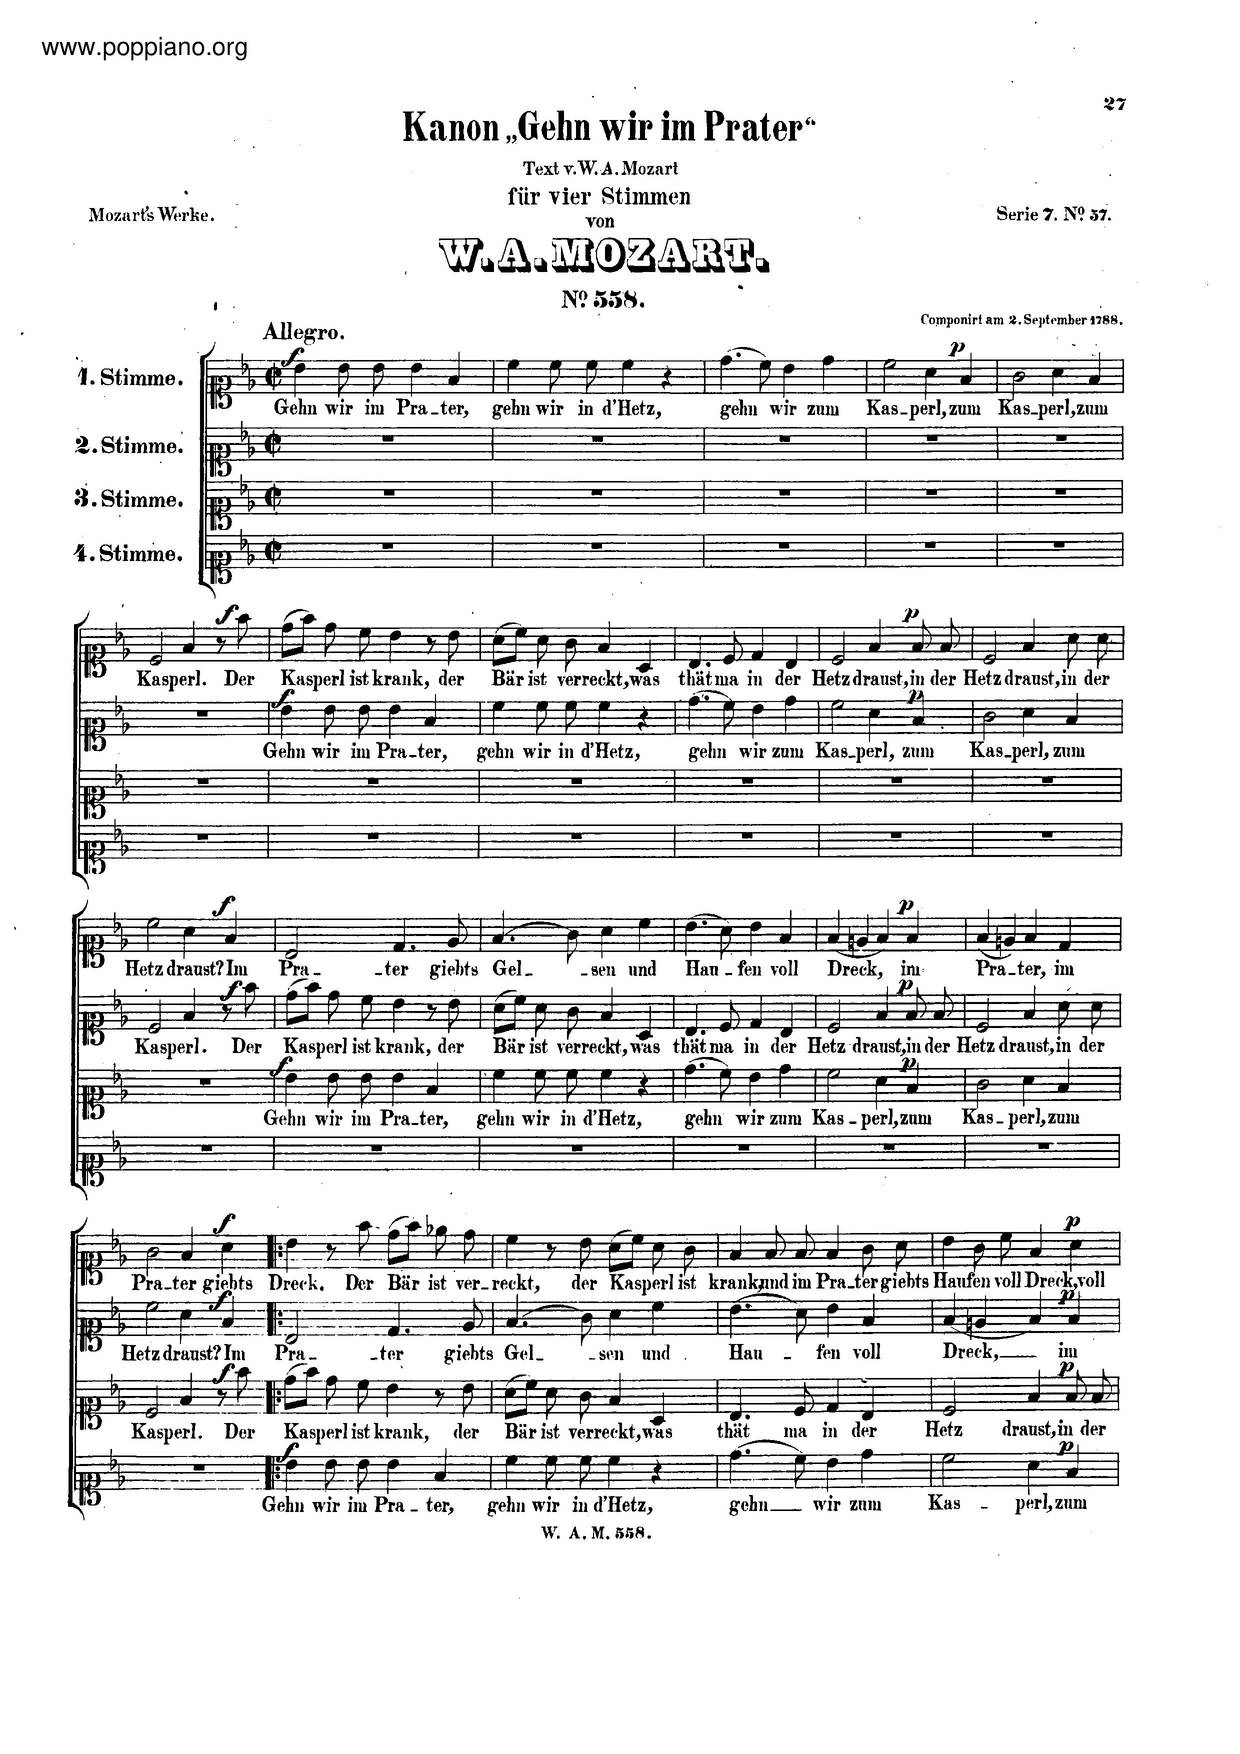 Canon For 4 Voices In B-Flat Major, K. 558 Score